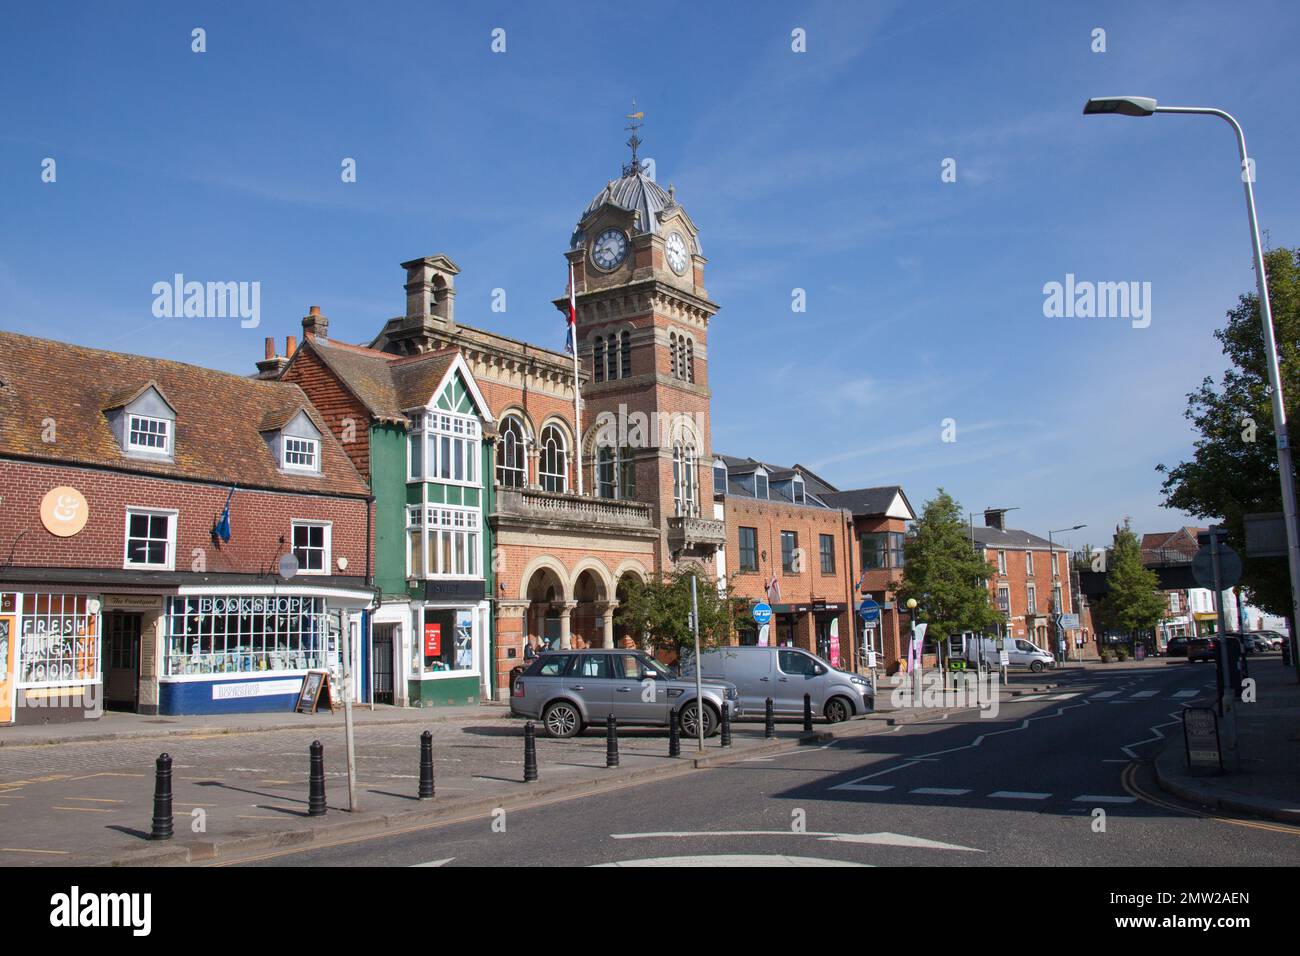 Views of Hungerford, Berkshire in the UK Stock Photo - Alamy